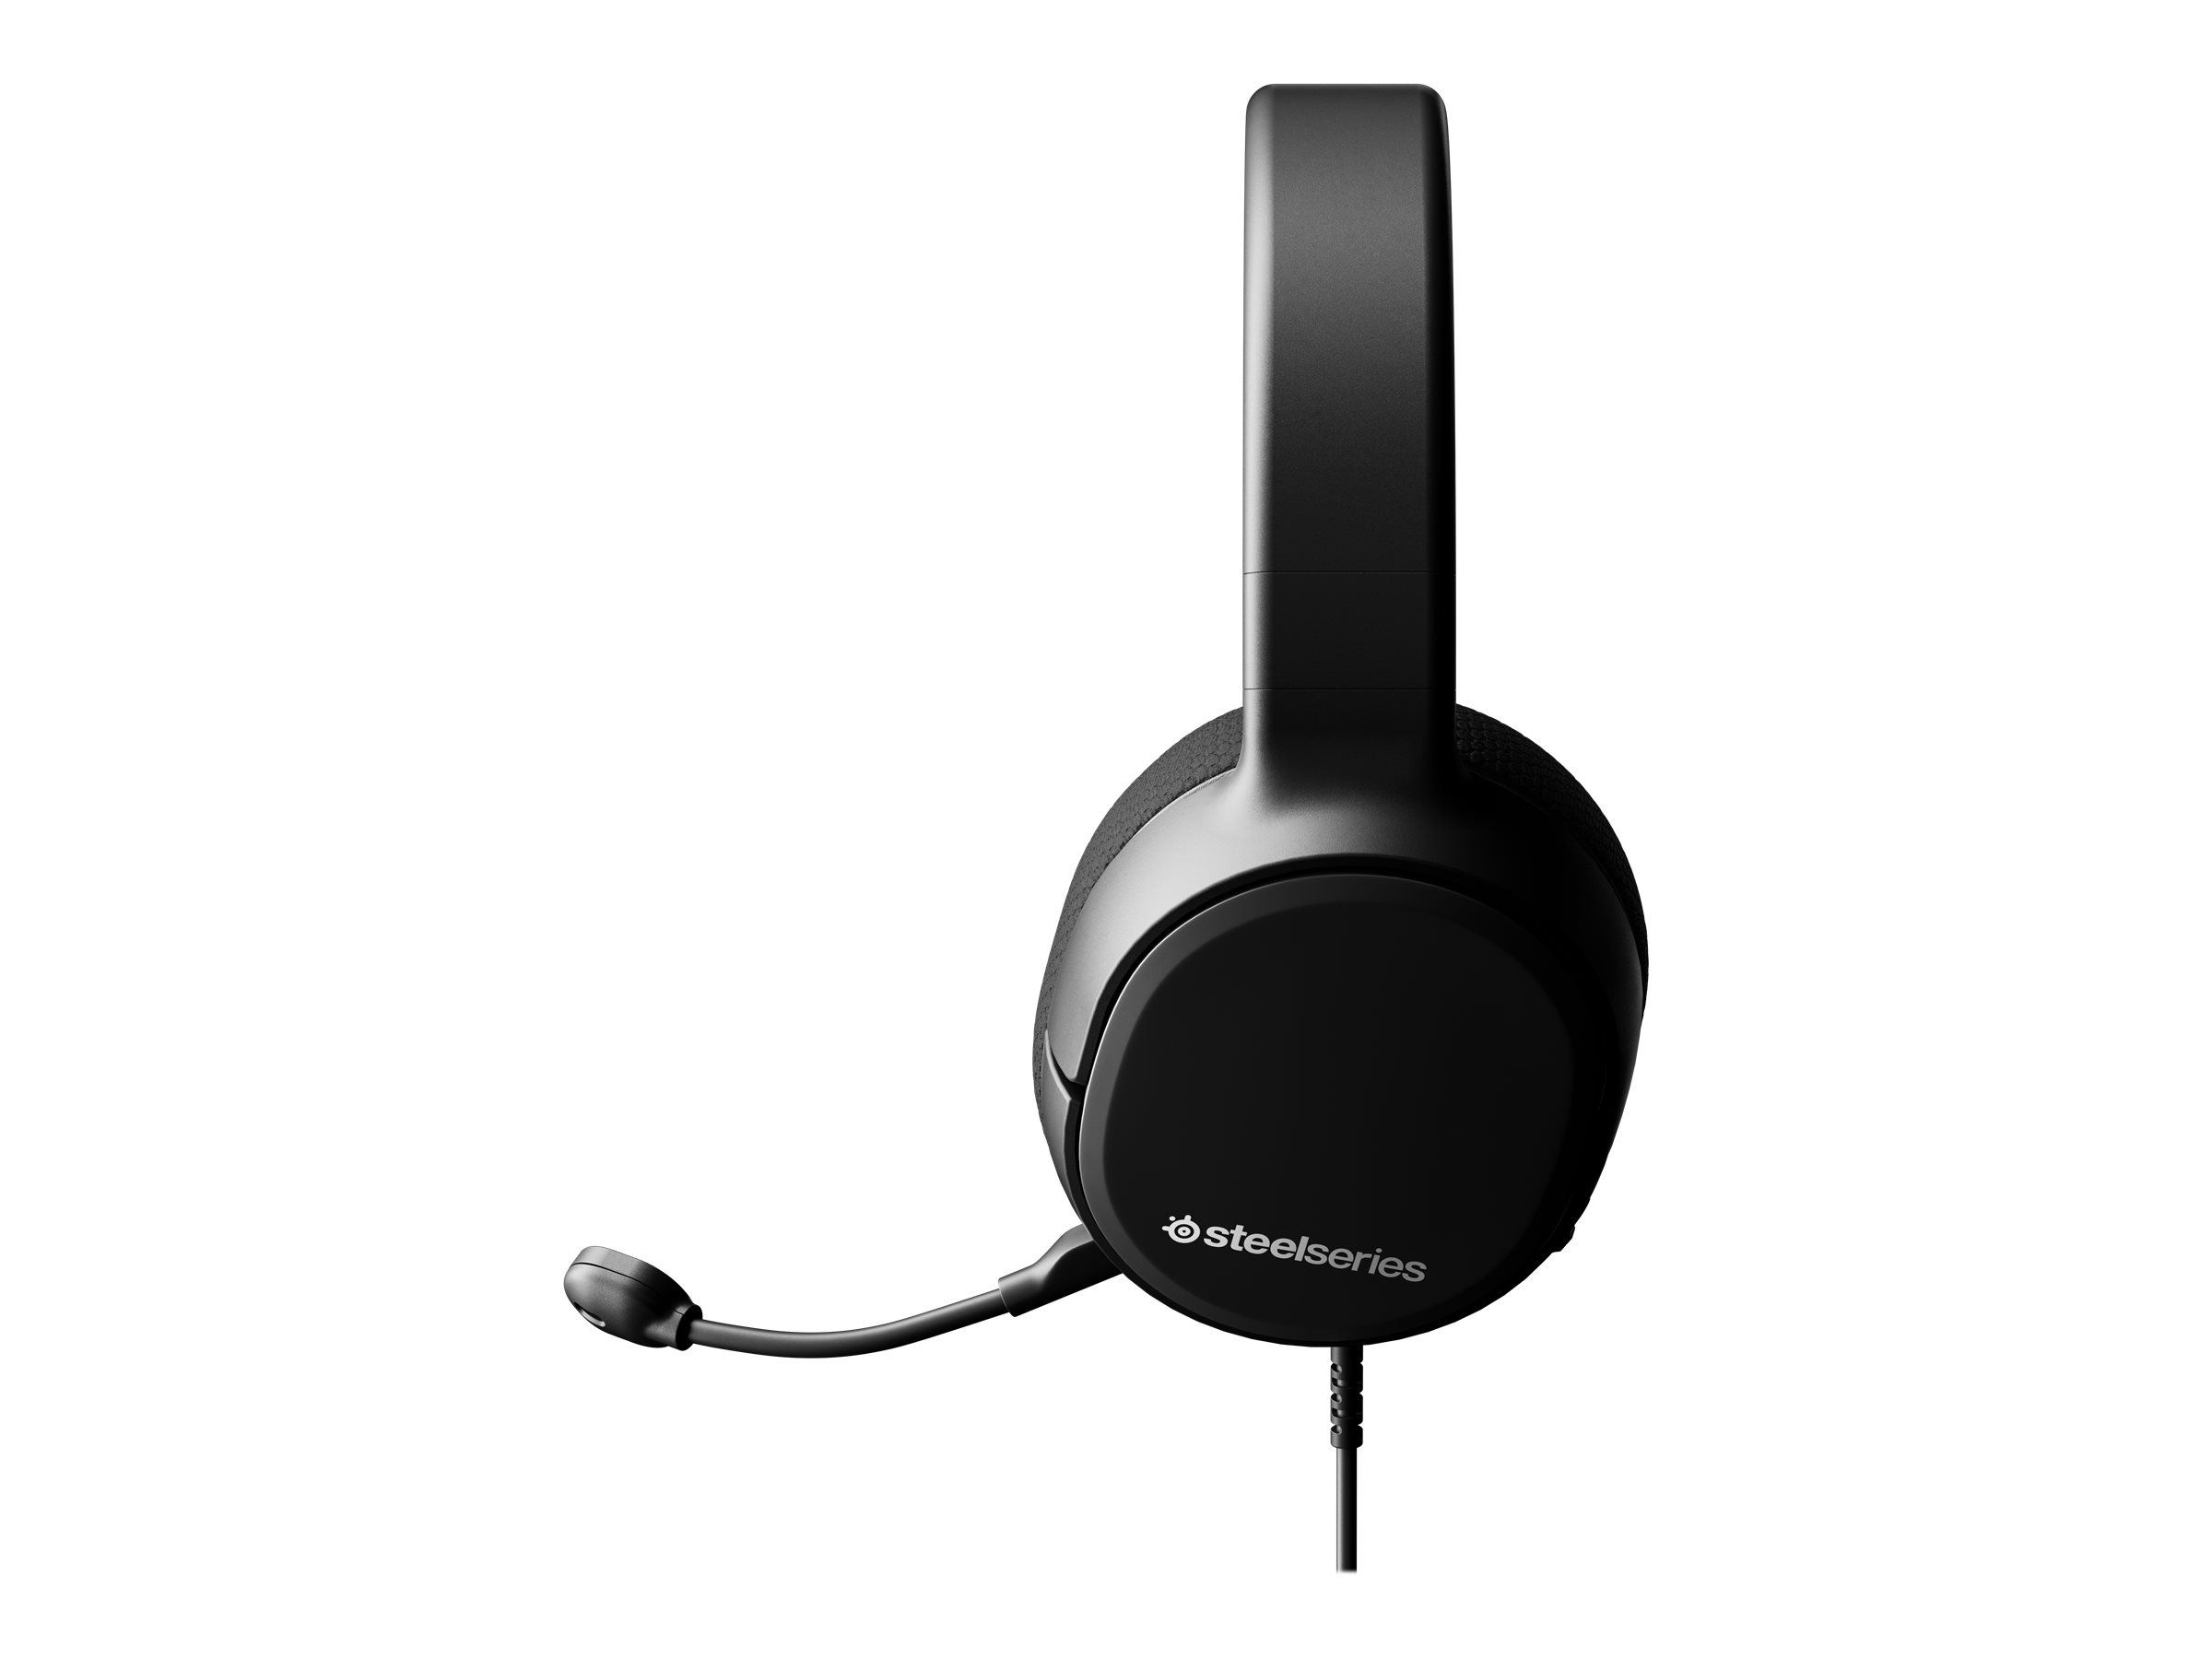 SteelSeries Arctis 1 Wireless Gaming Headset - USB-C Wireless - Detachable Clearcast Microphone - for PS4, PC, Nintendo Switch and Lite, Android - Black - Playstation 4 - image 4 of 6